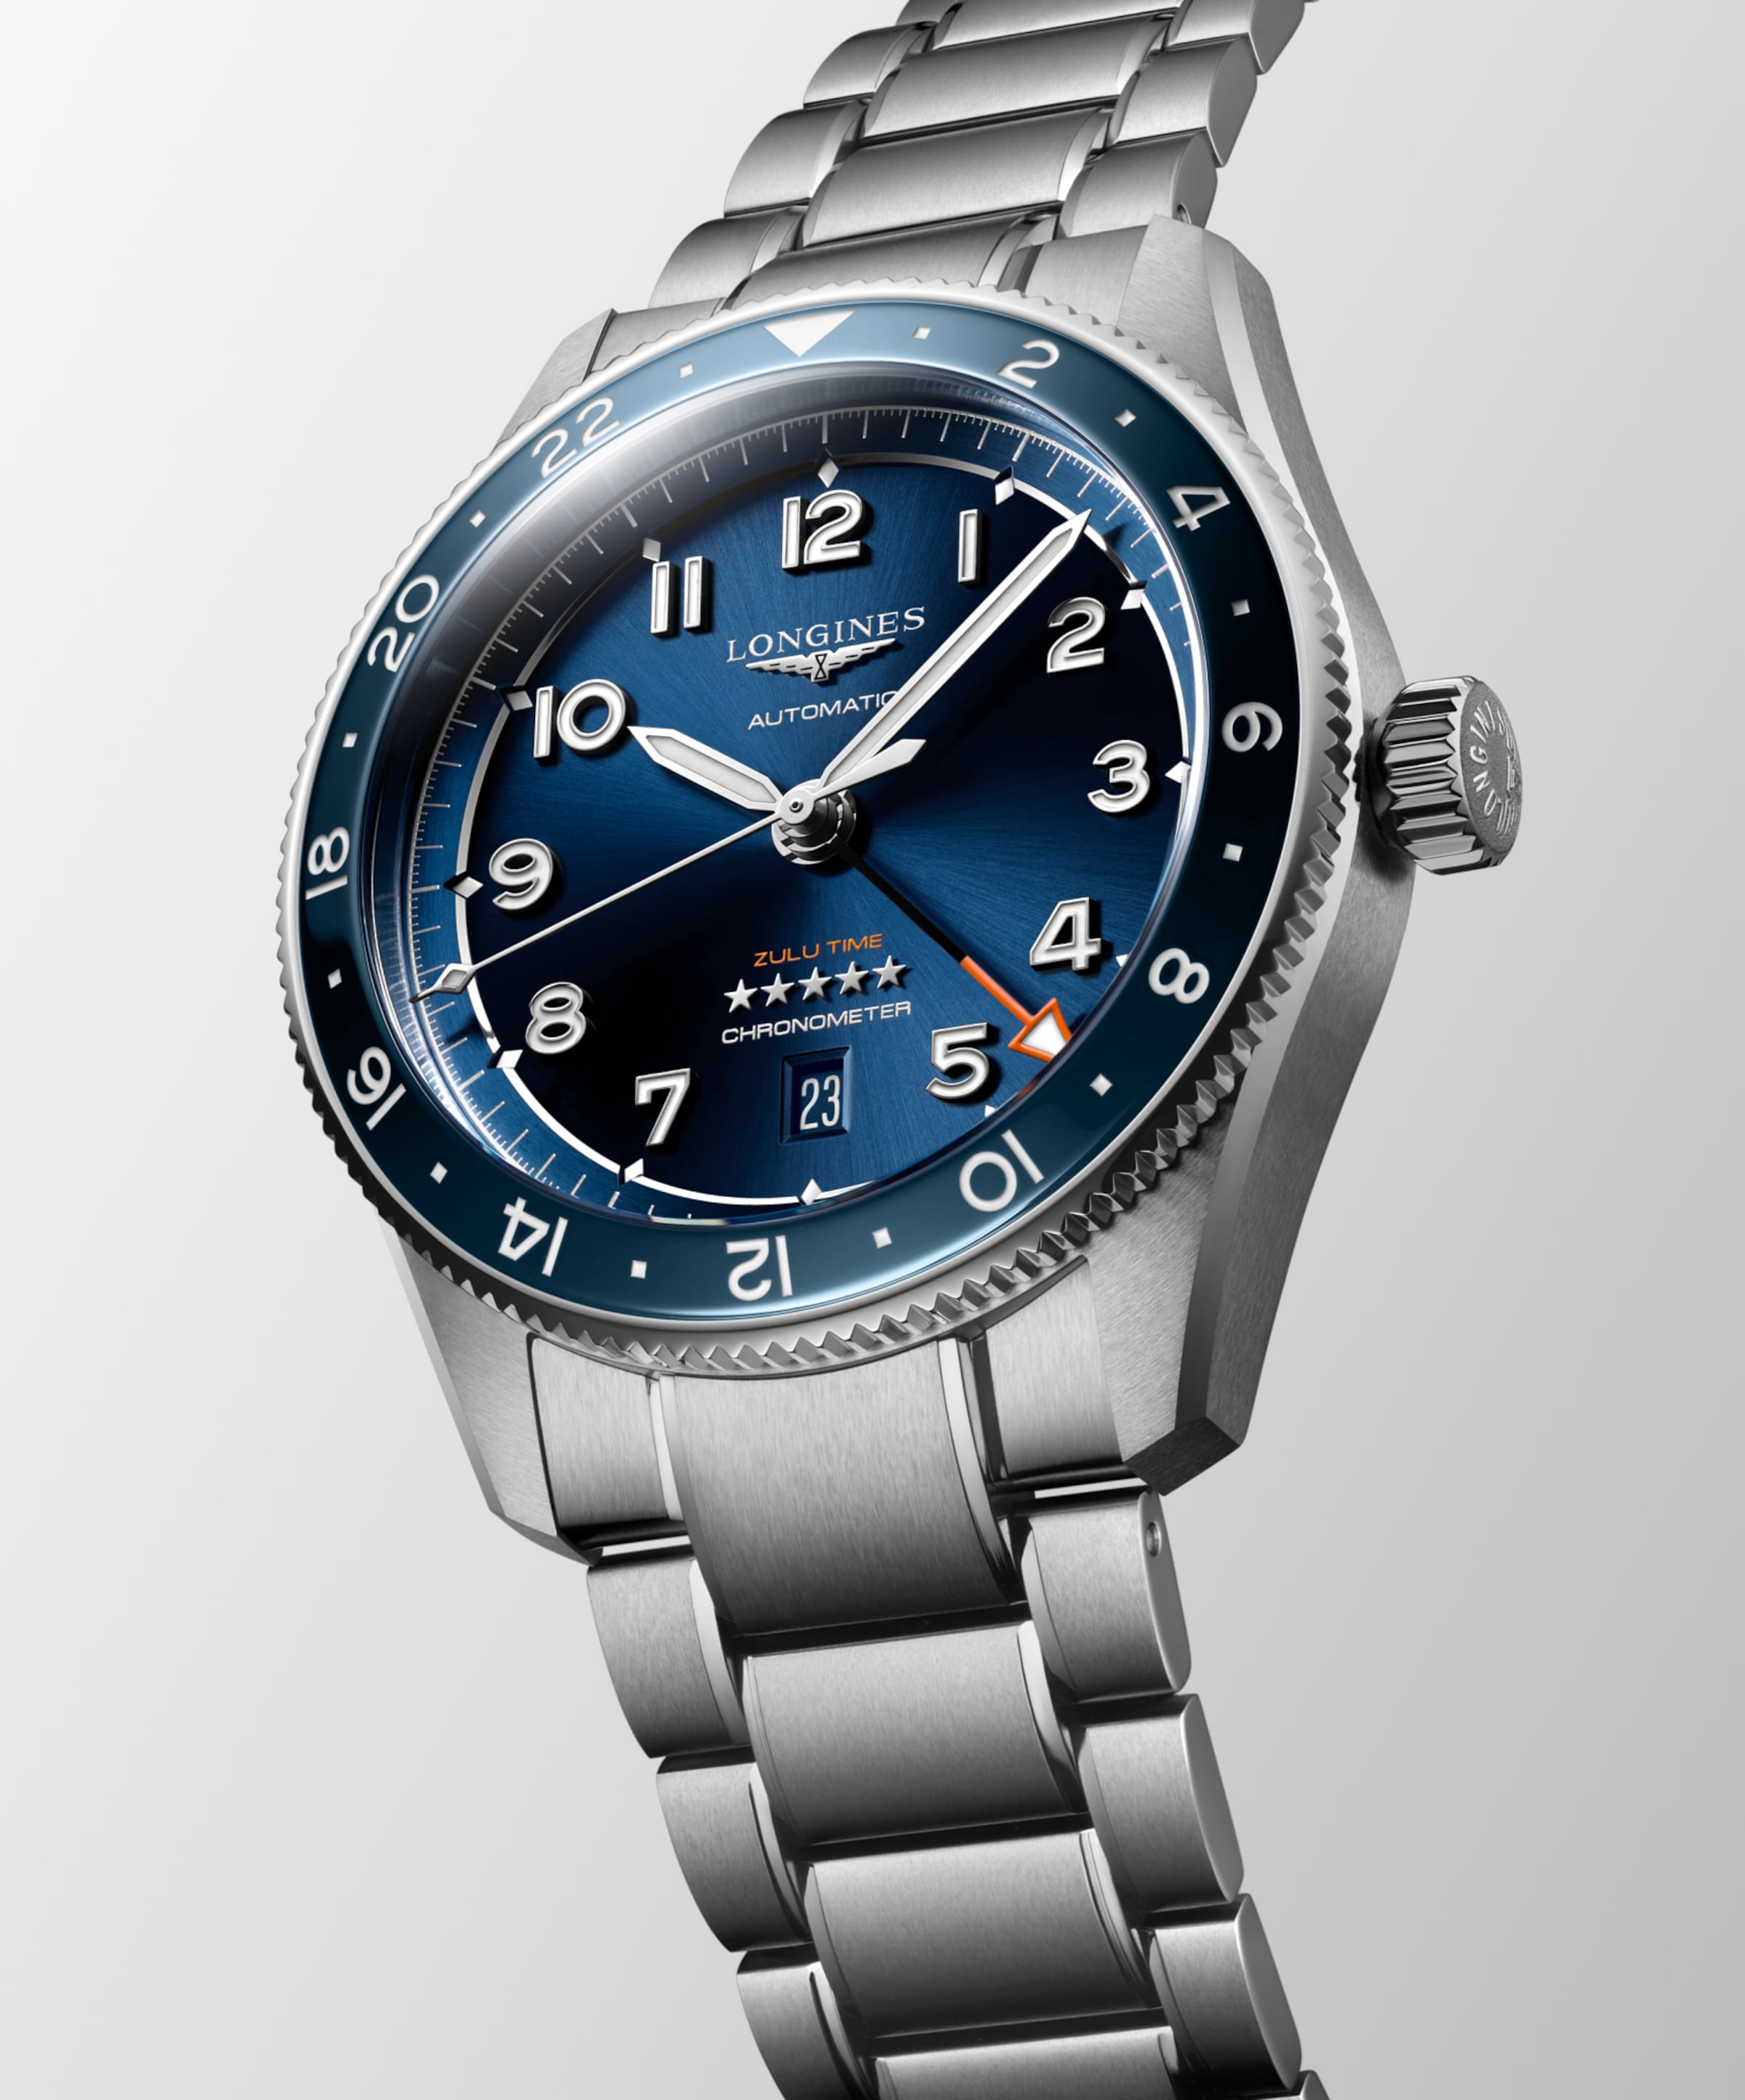 Longines SPIRIT Automatic Stainless steel and ceramic bezel Watch - L3.812.4.93.6